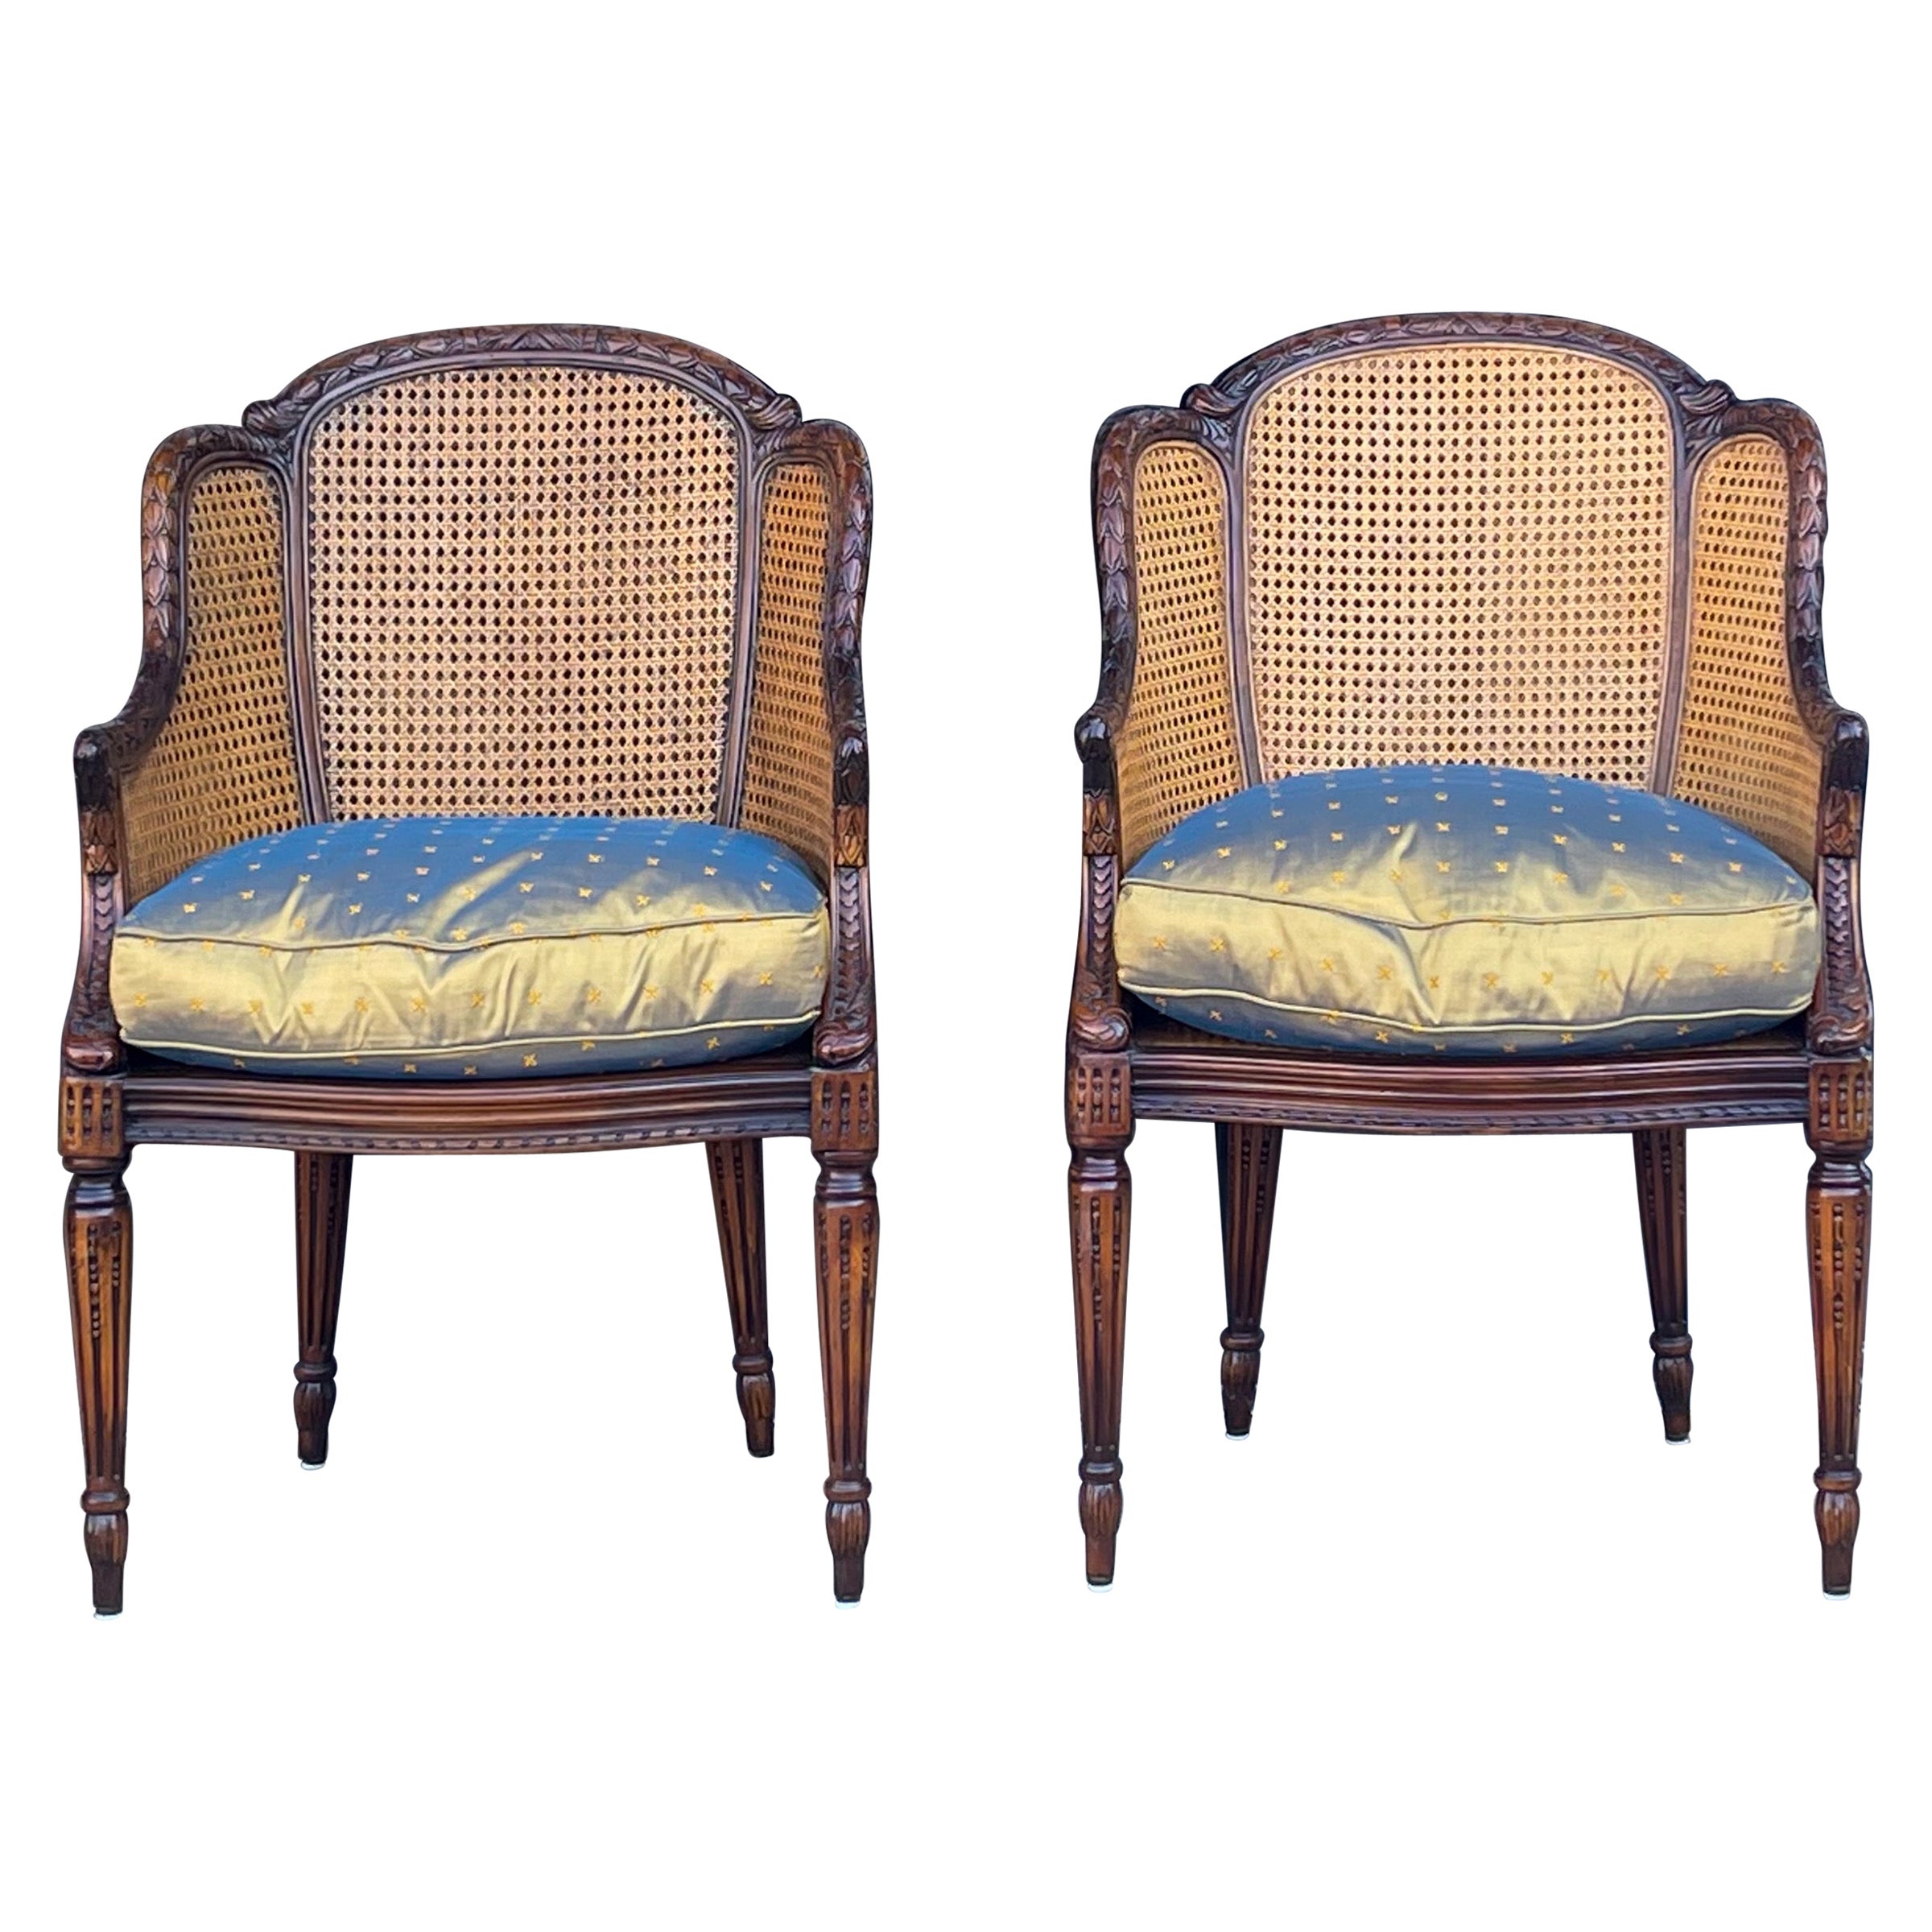 20th Century French Style Double Cane Chairs By Maitland-Smith, Pair